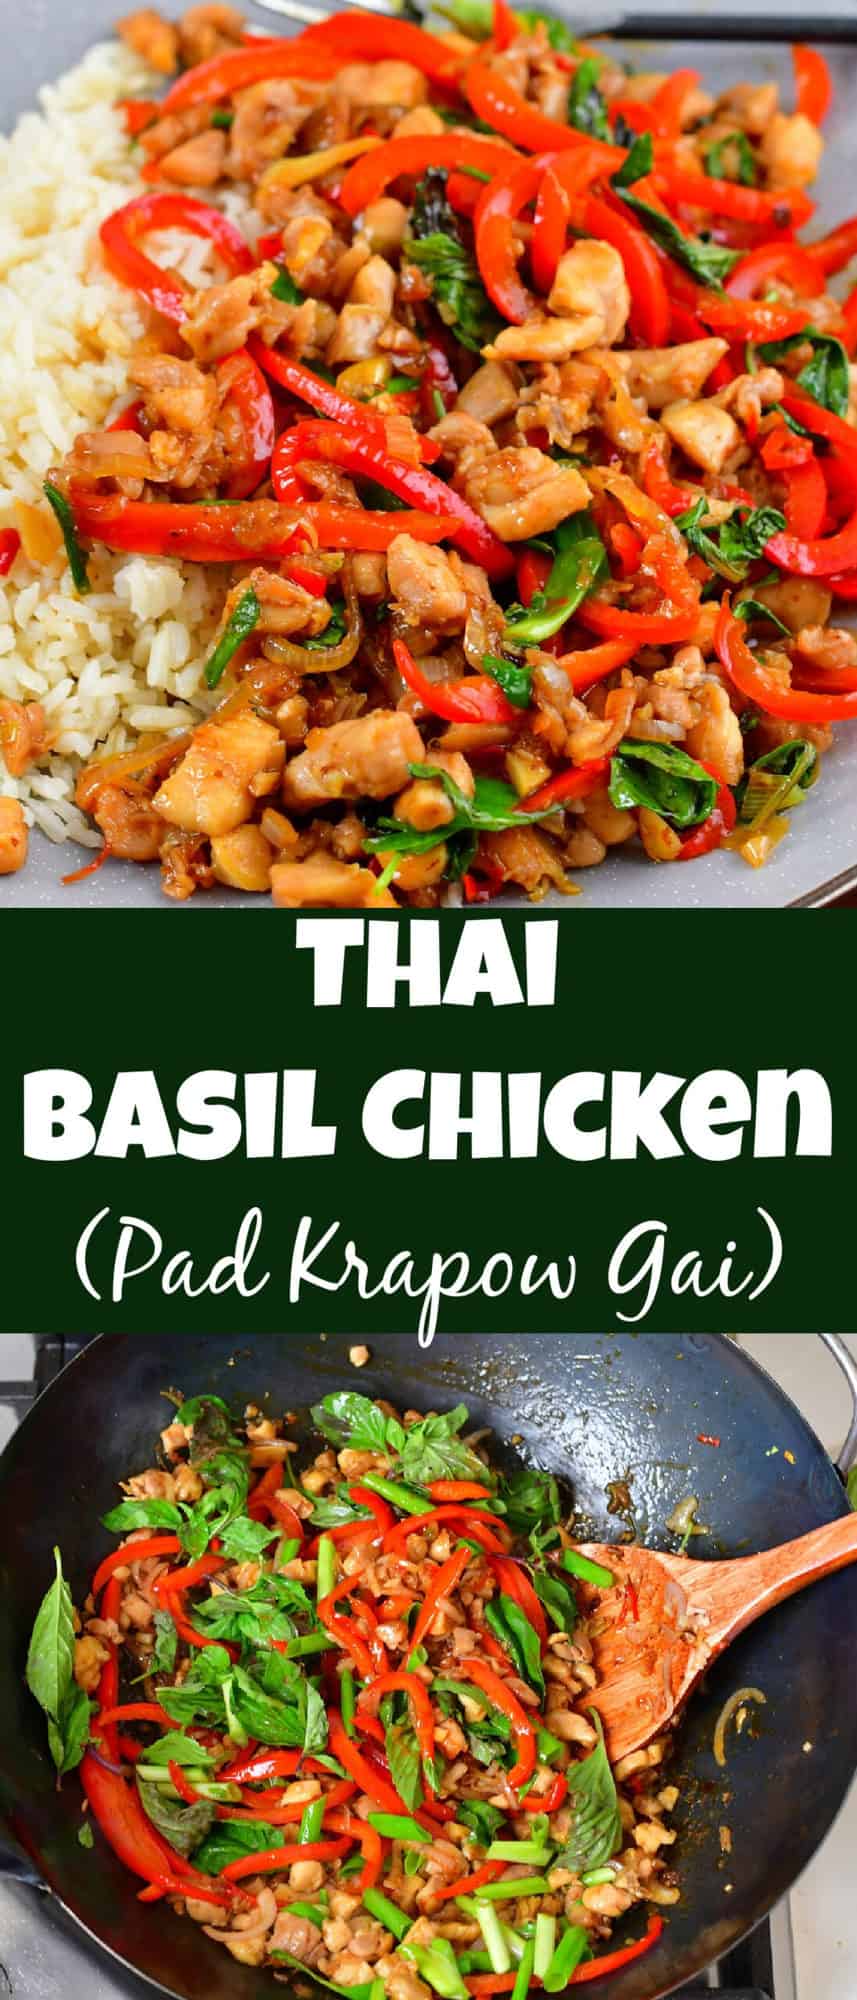 collage of two closeup images of cooked Basil chicken